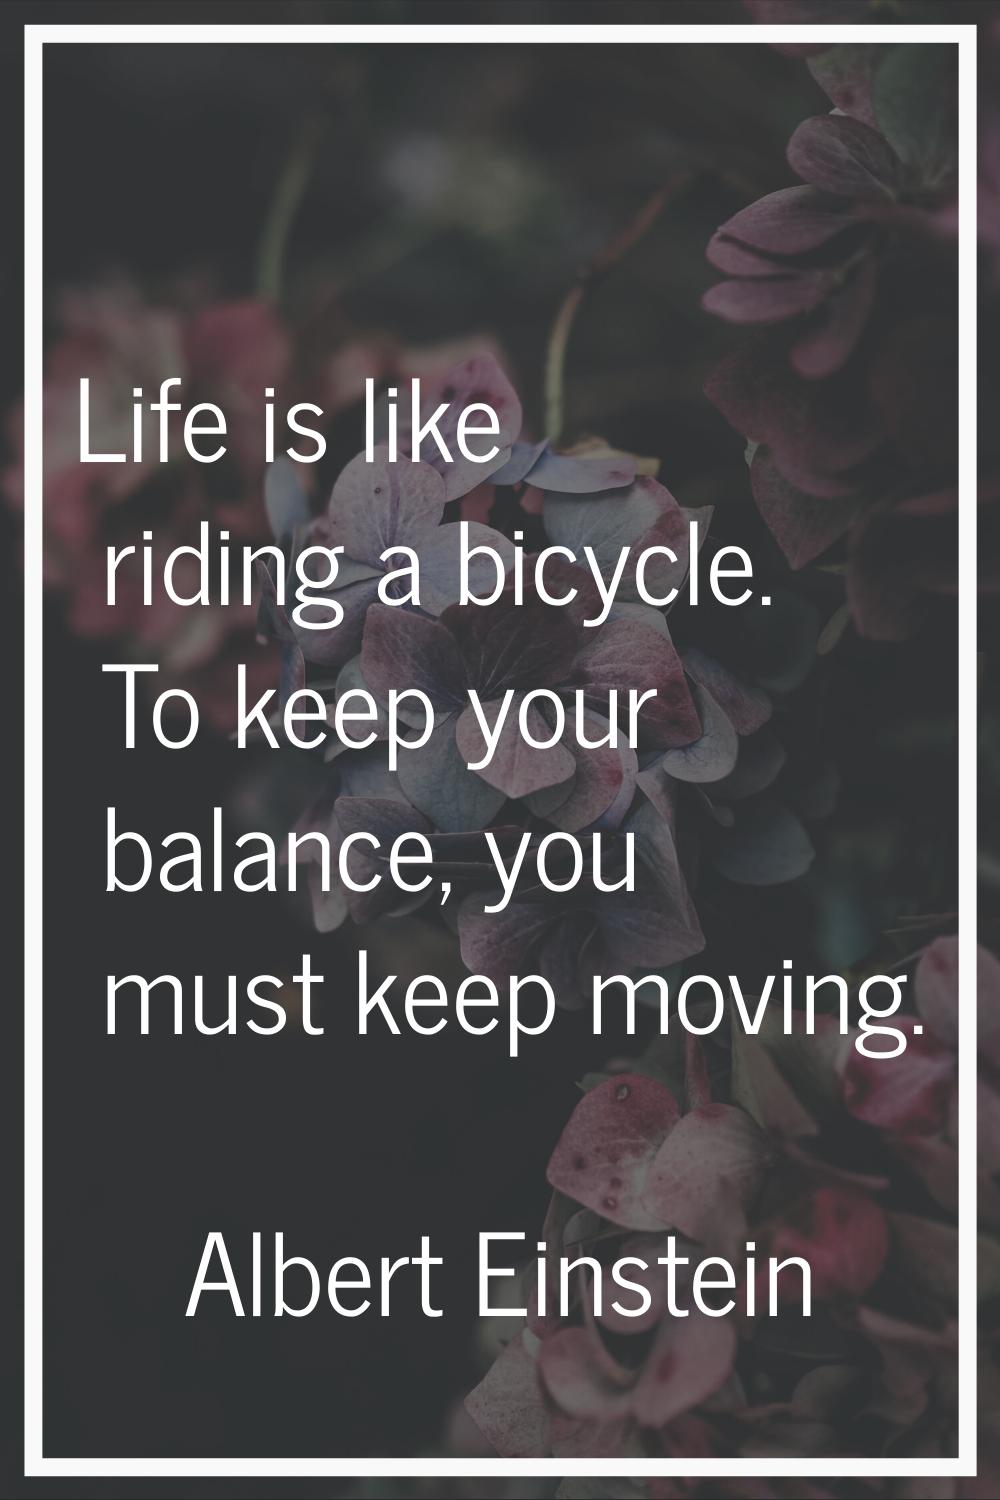 Life is like riding a bicycle. To keep your balance, you must keep moving.